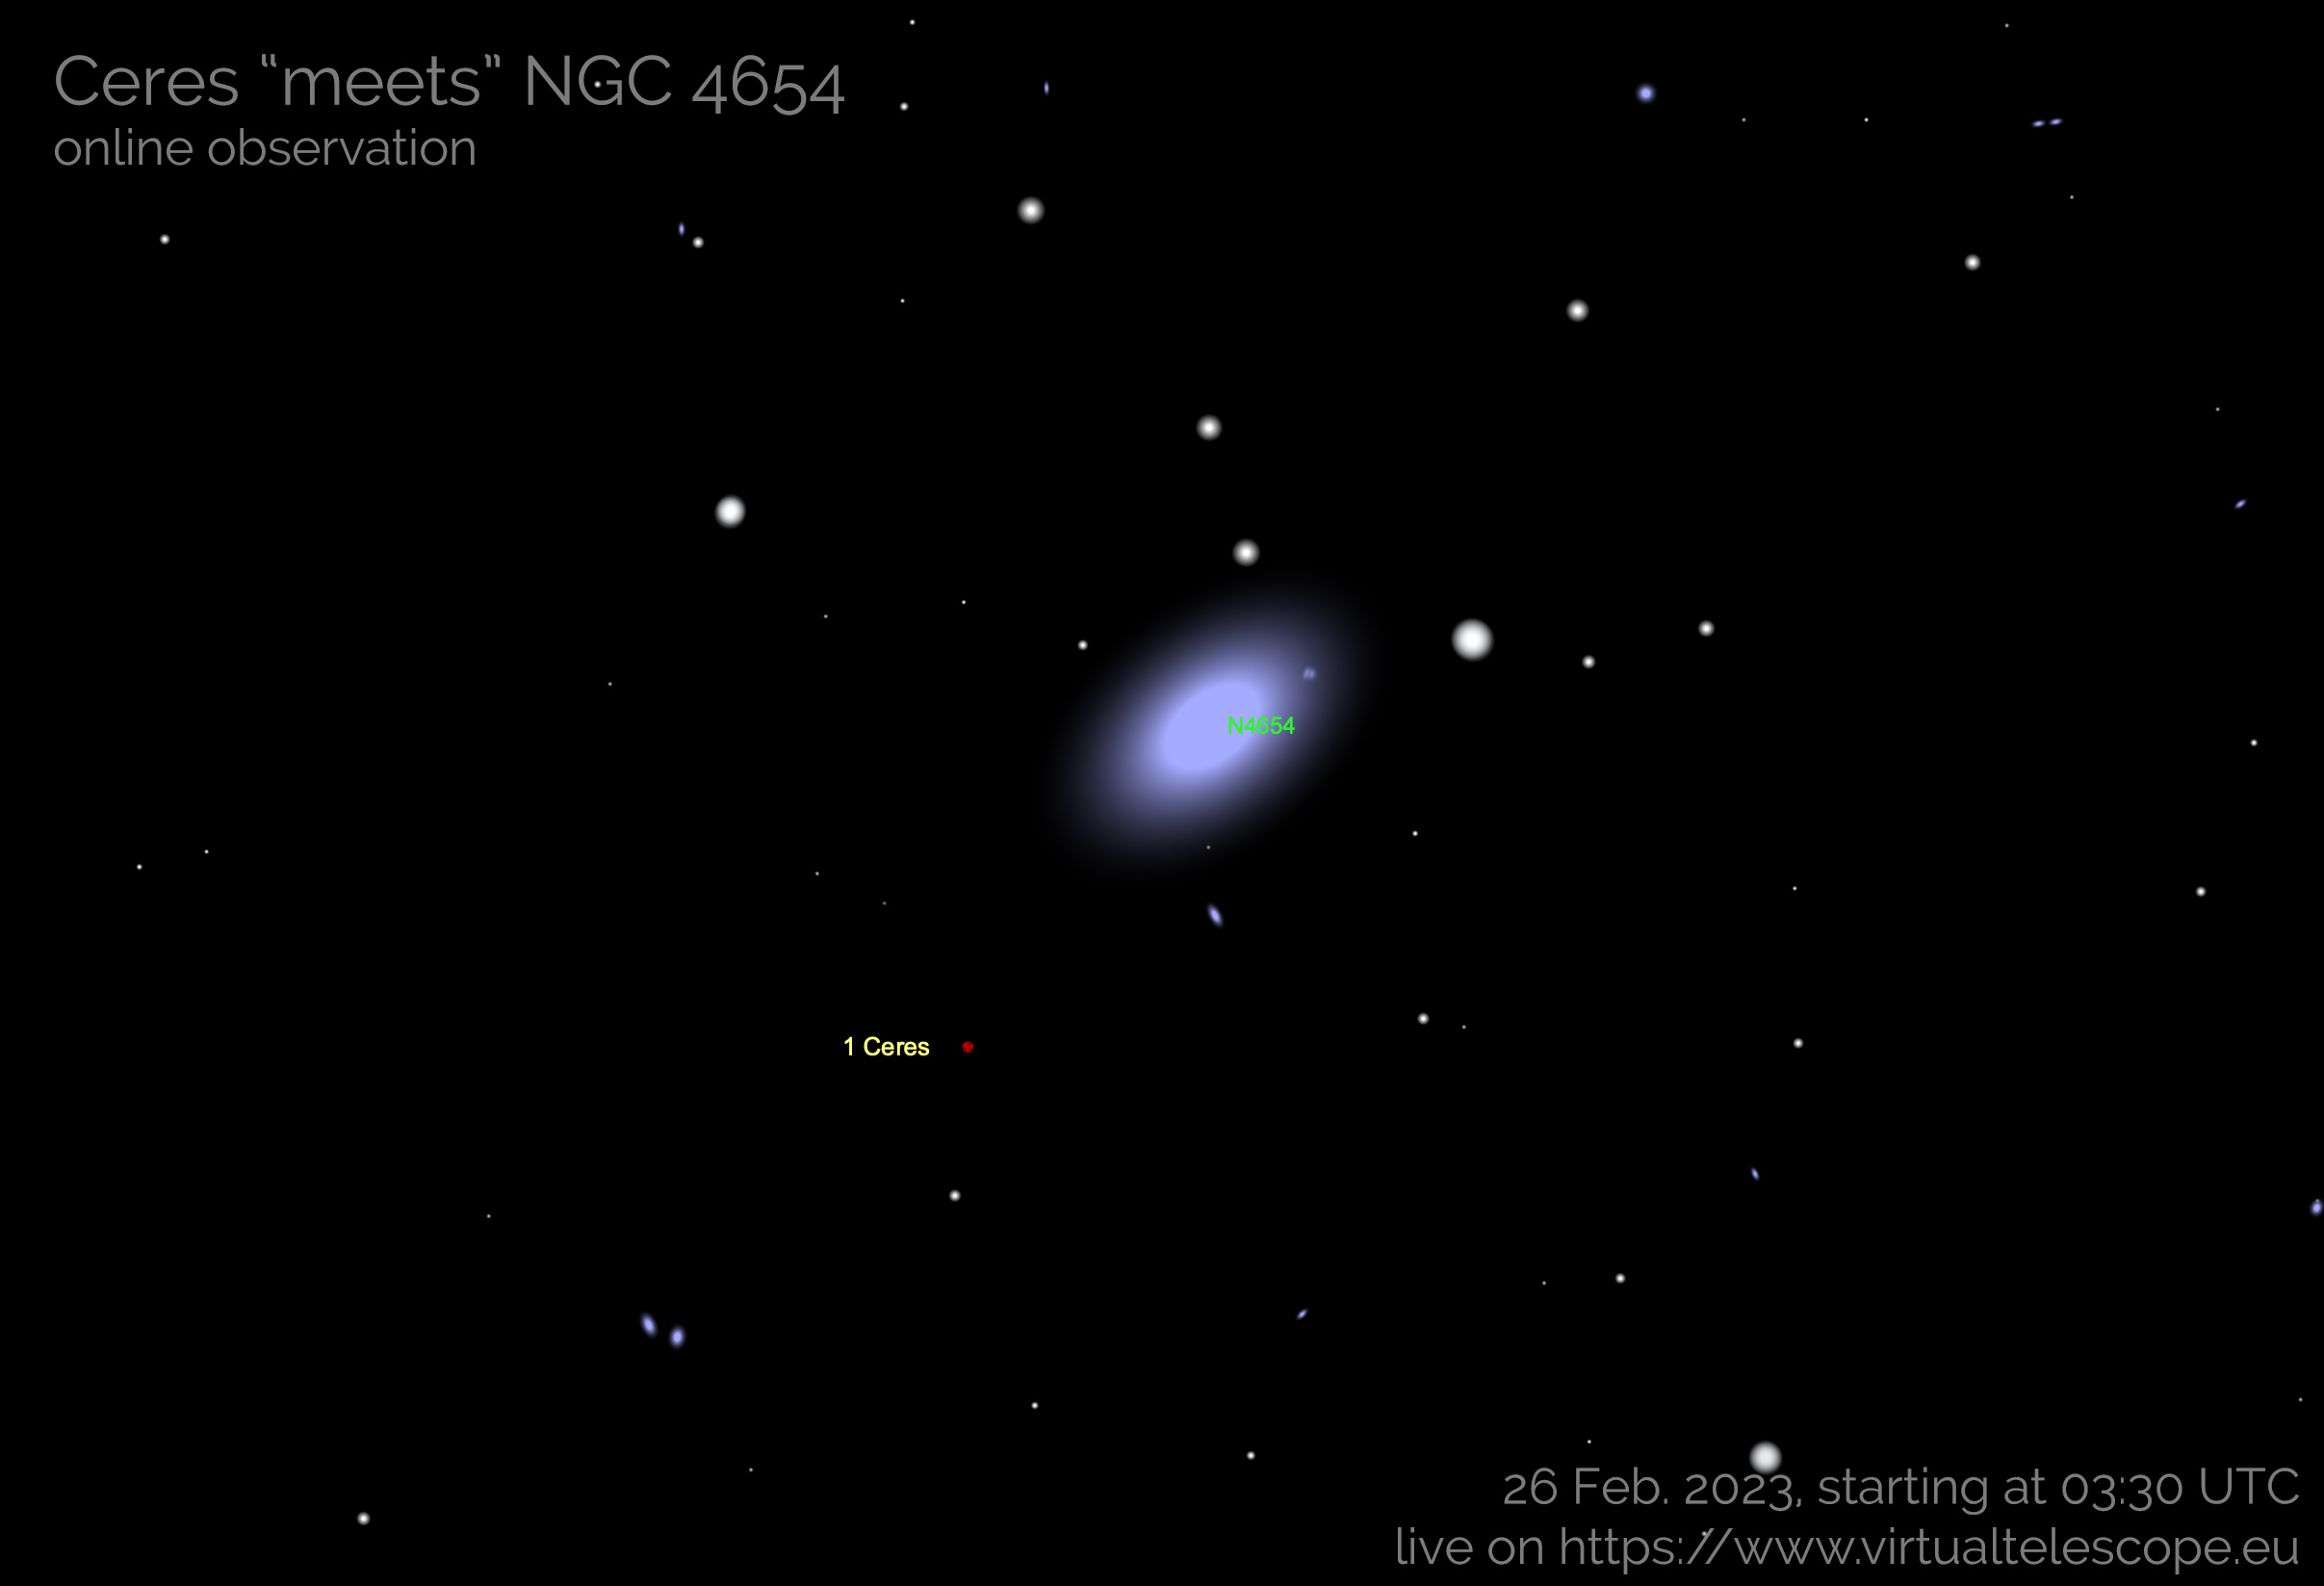 Ceres “meets” NGC 4654: poster of the event.